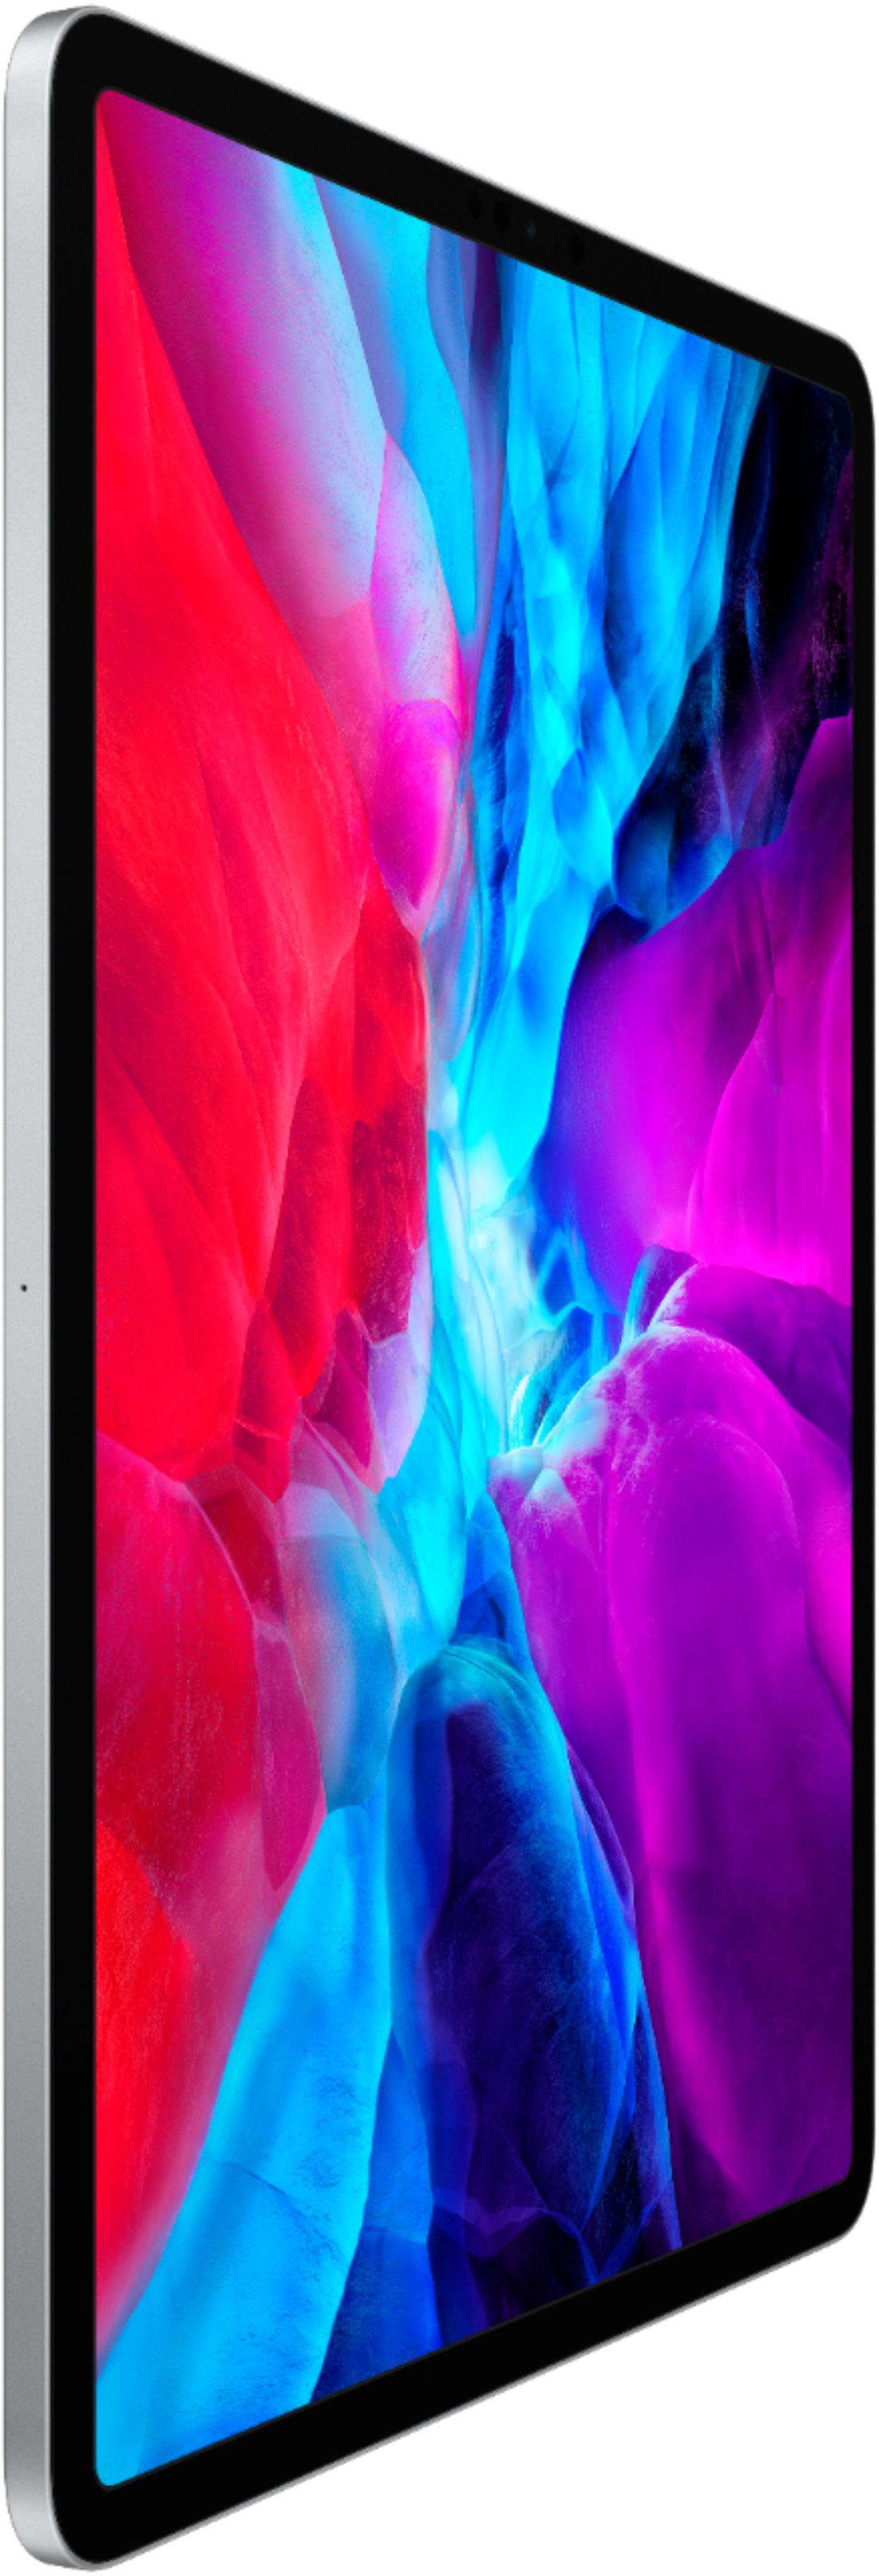 PC/タブレット タブレット Best Buy: Apple 12.9-Inch iPad Pro (4th Generation) with Wi-Fi 